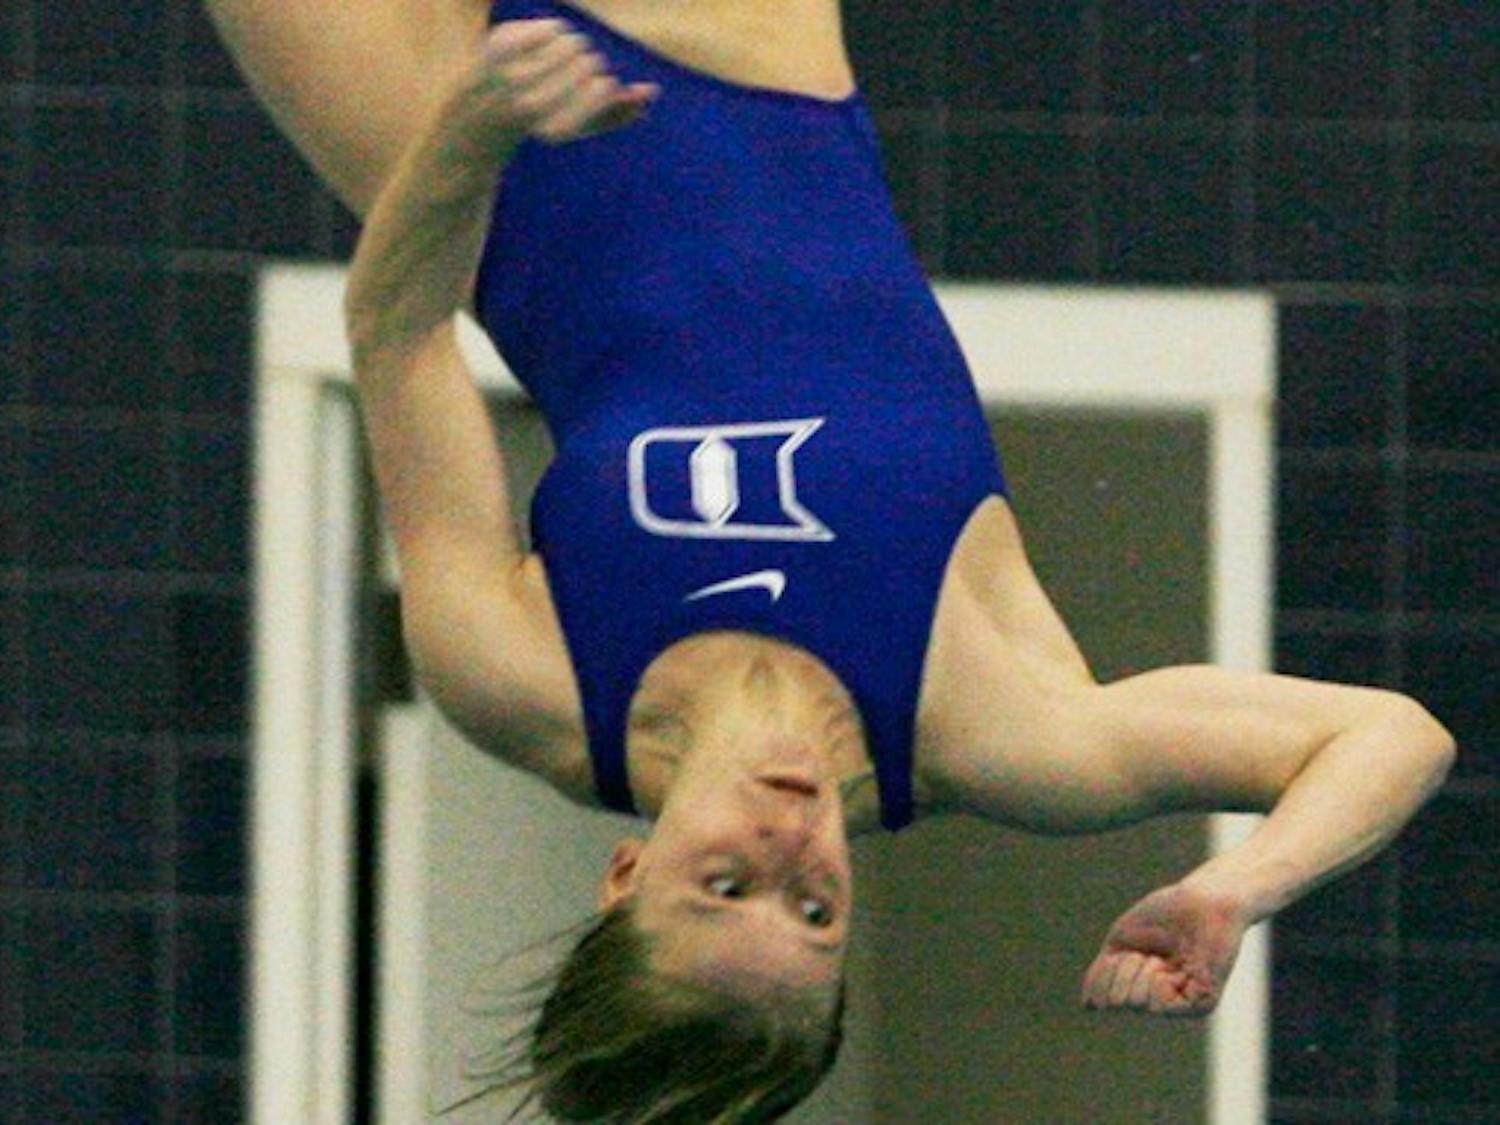 Abby Johnston successfully defended the one- and three-meter diving titles in Atlanta this weekend.